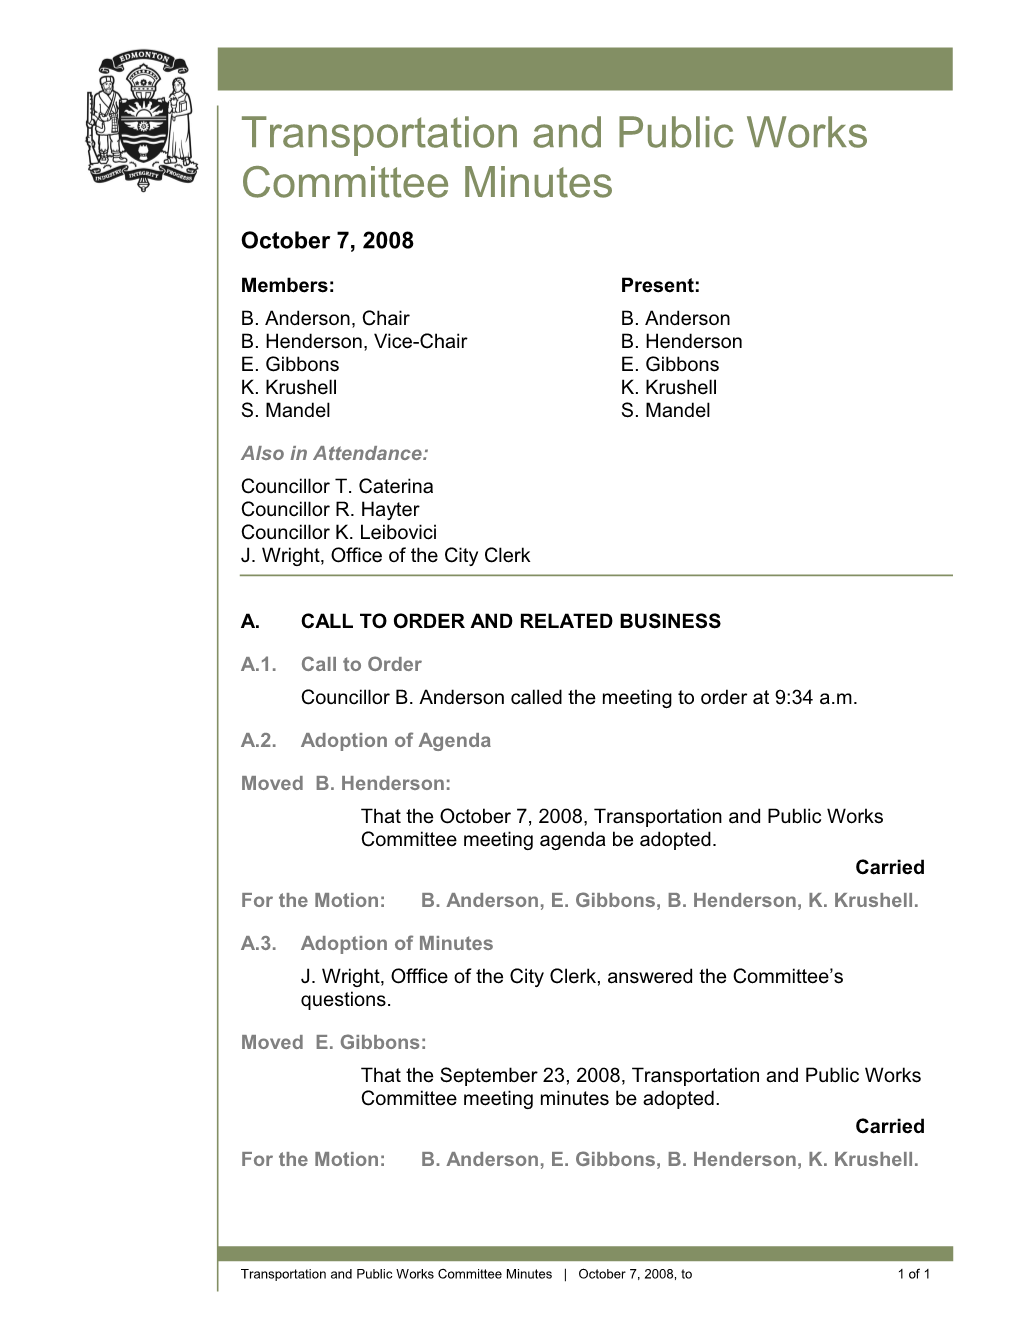 Minutes for Transportation and Public Works Committee October 7, 2008 Meeting